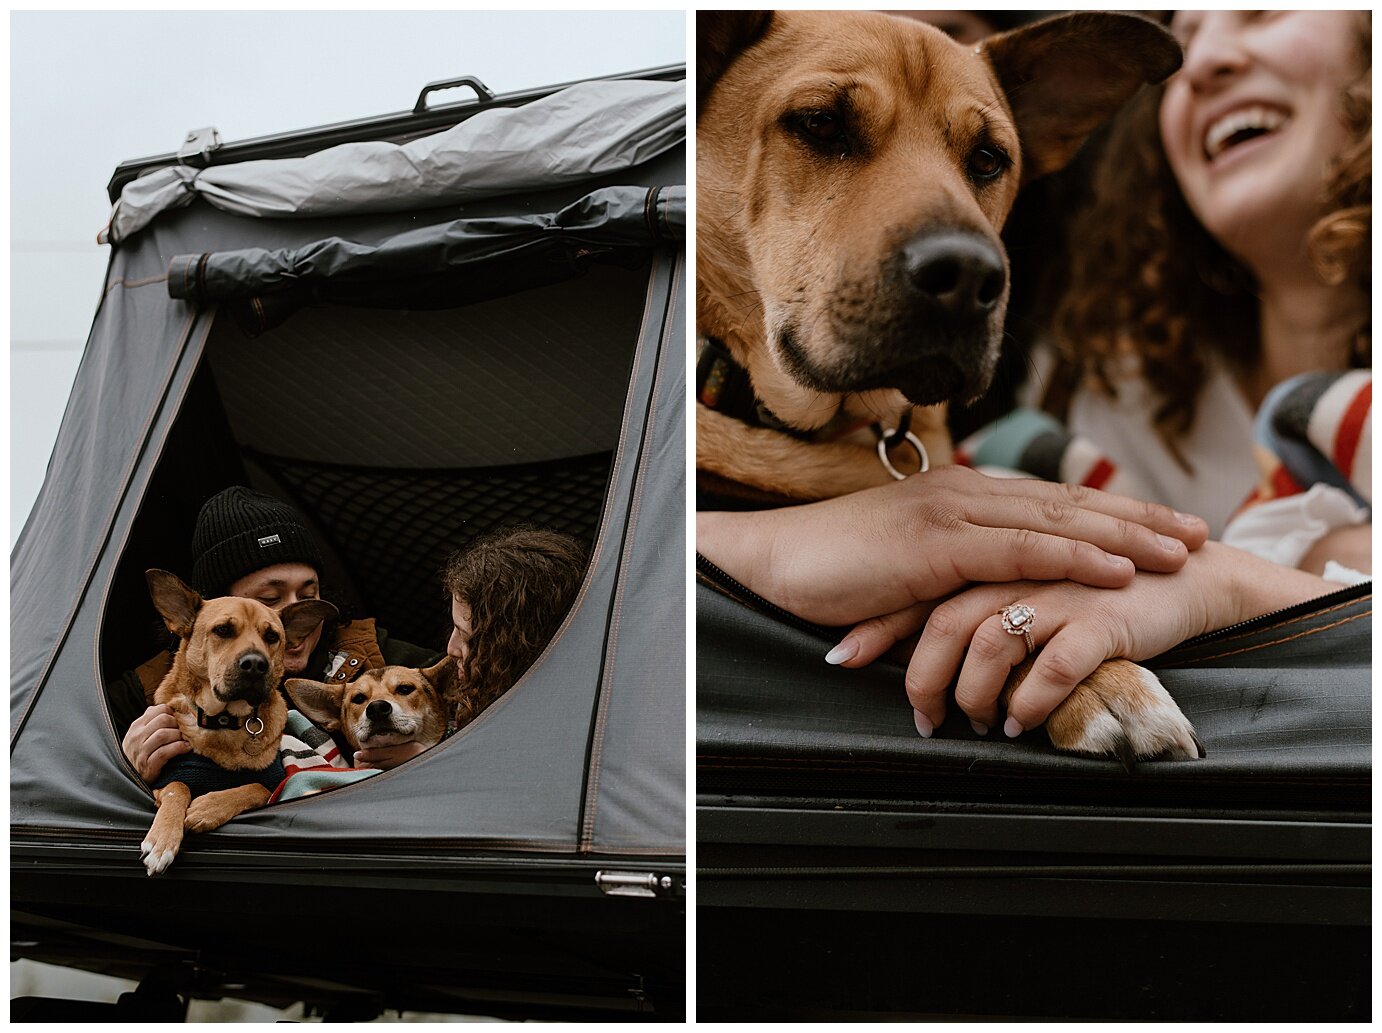 engaged couple in a tent with their dogs